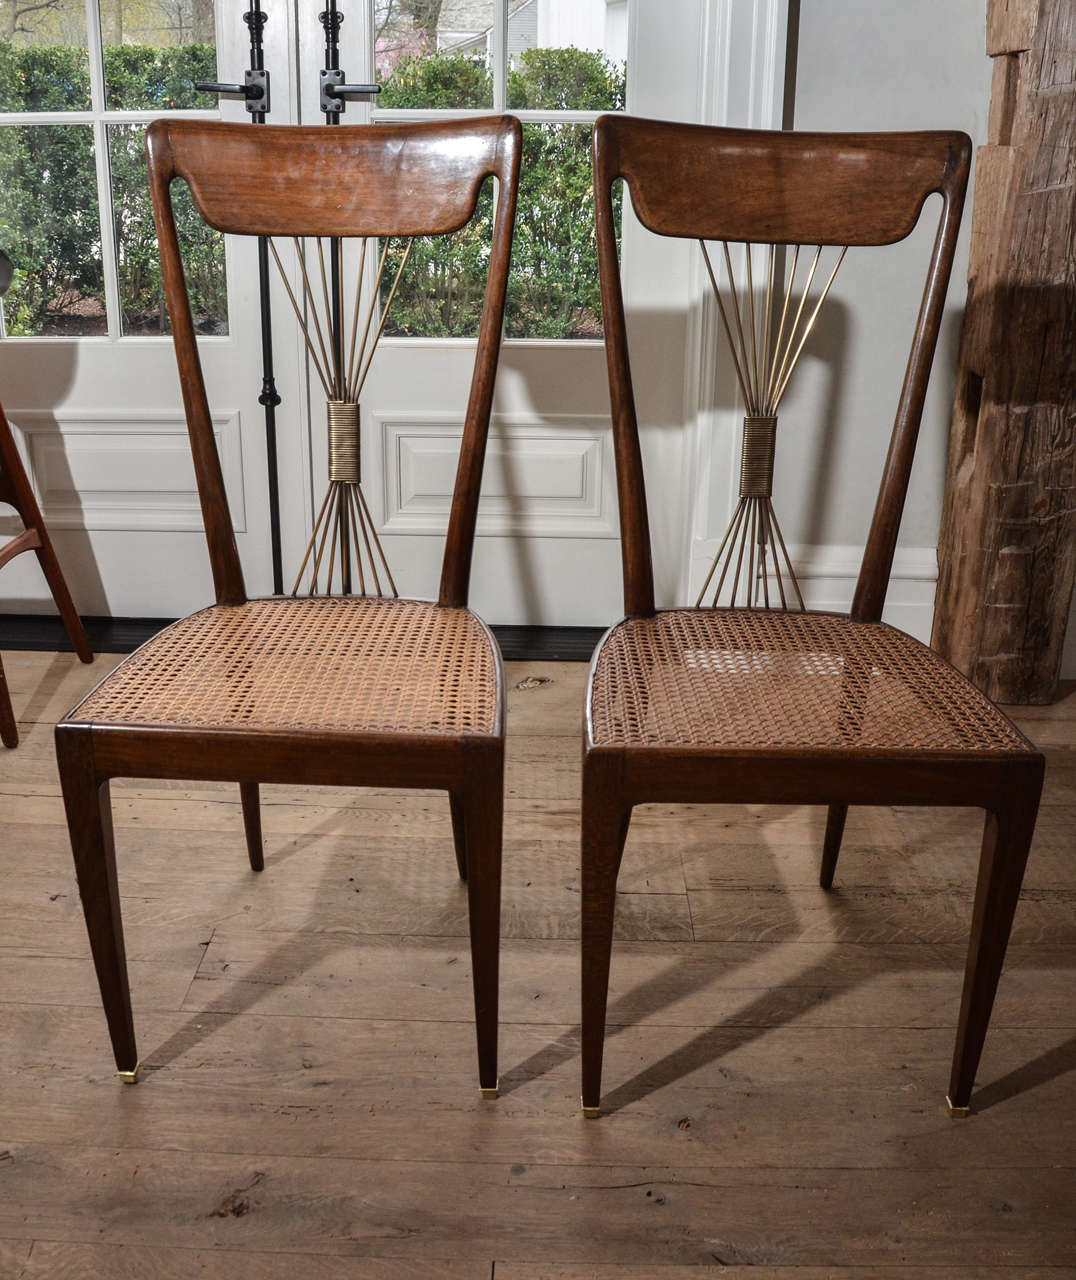 Exquisit pair of 1950s six Paolo Buffa dining chairs in rosewood with original caning inspired by the French Art Nouveau. The center back shows beautiful seven cords made out of brass, adding a very sophisticated and elegant touch to the chairs yet